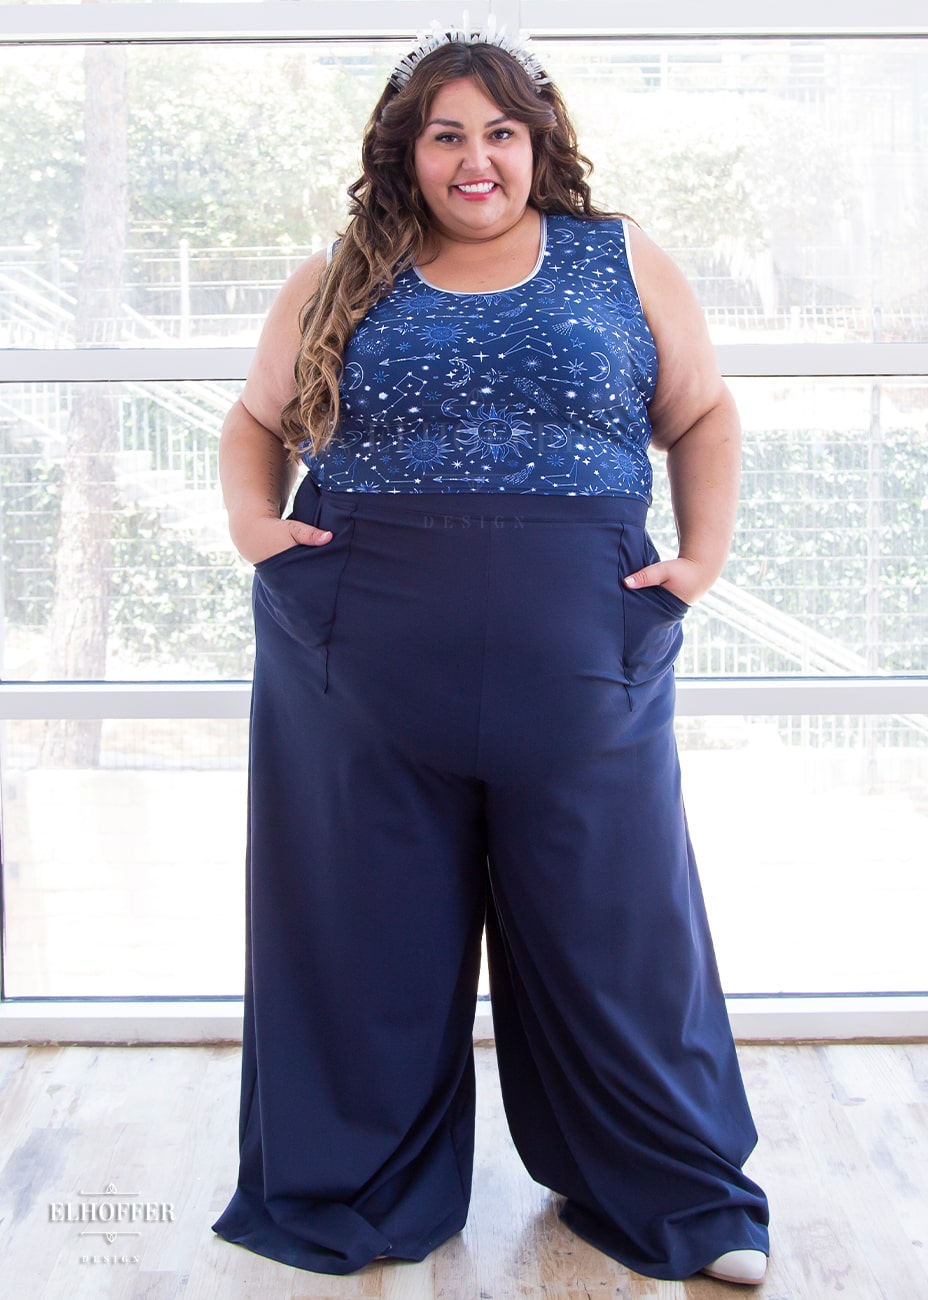 Kristen, a size 3XL olive skinned model with long brown highlighted hair is wearing high waisted full palazzo pants with front pockets and an invisible zipper on the side seam in navy.